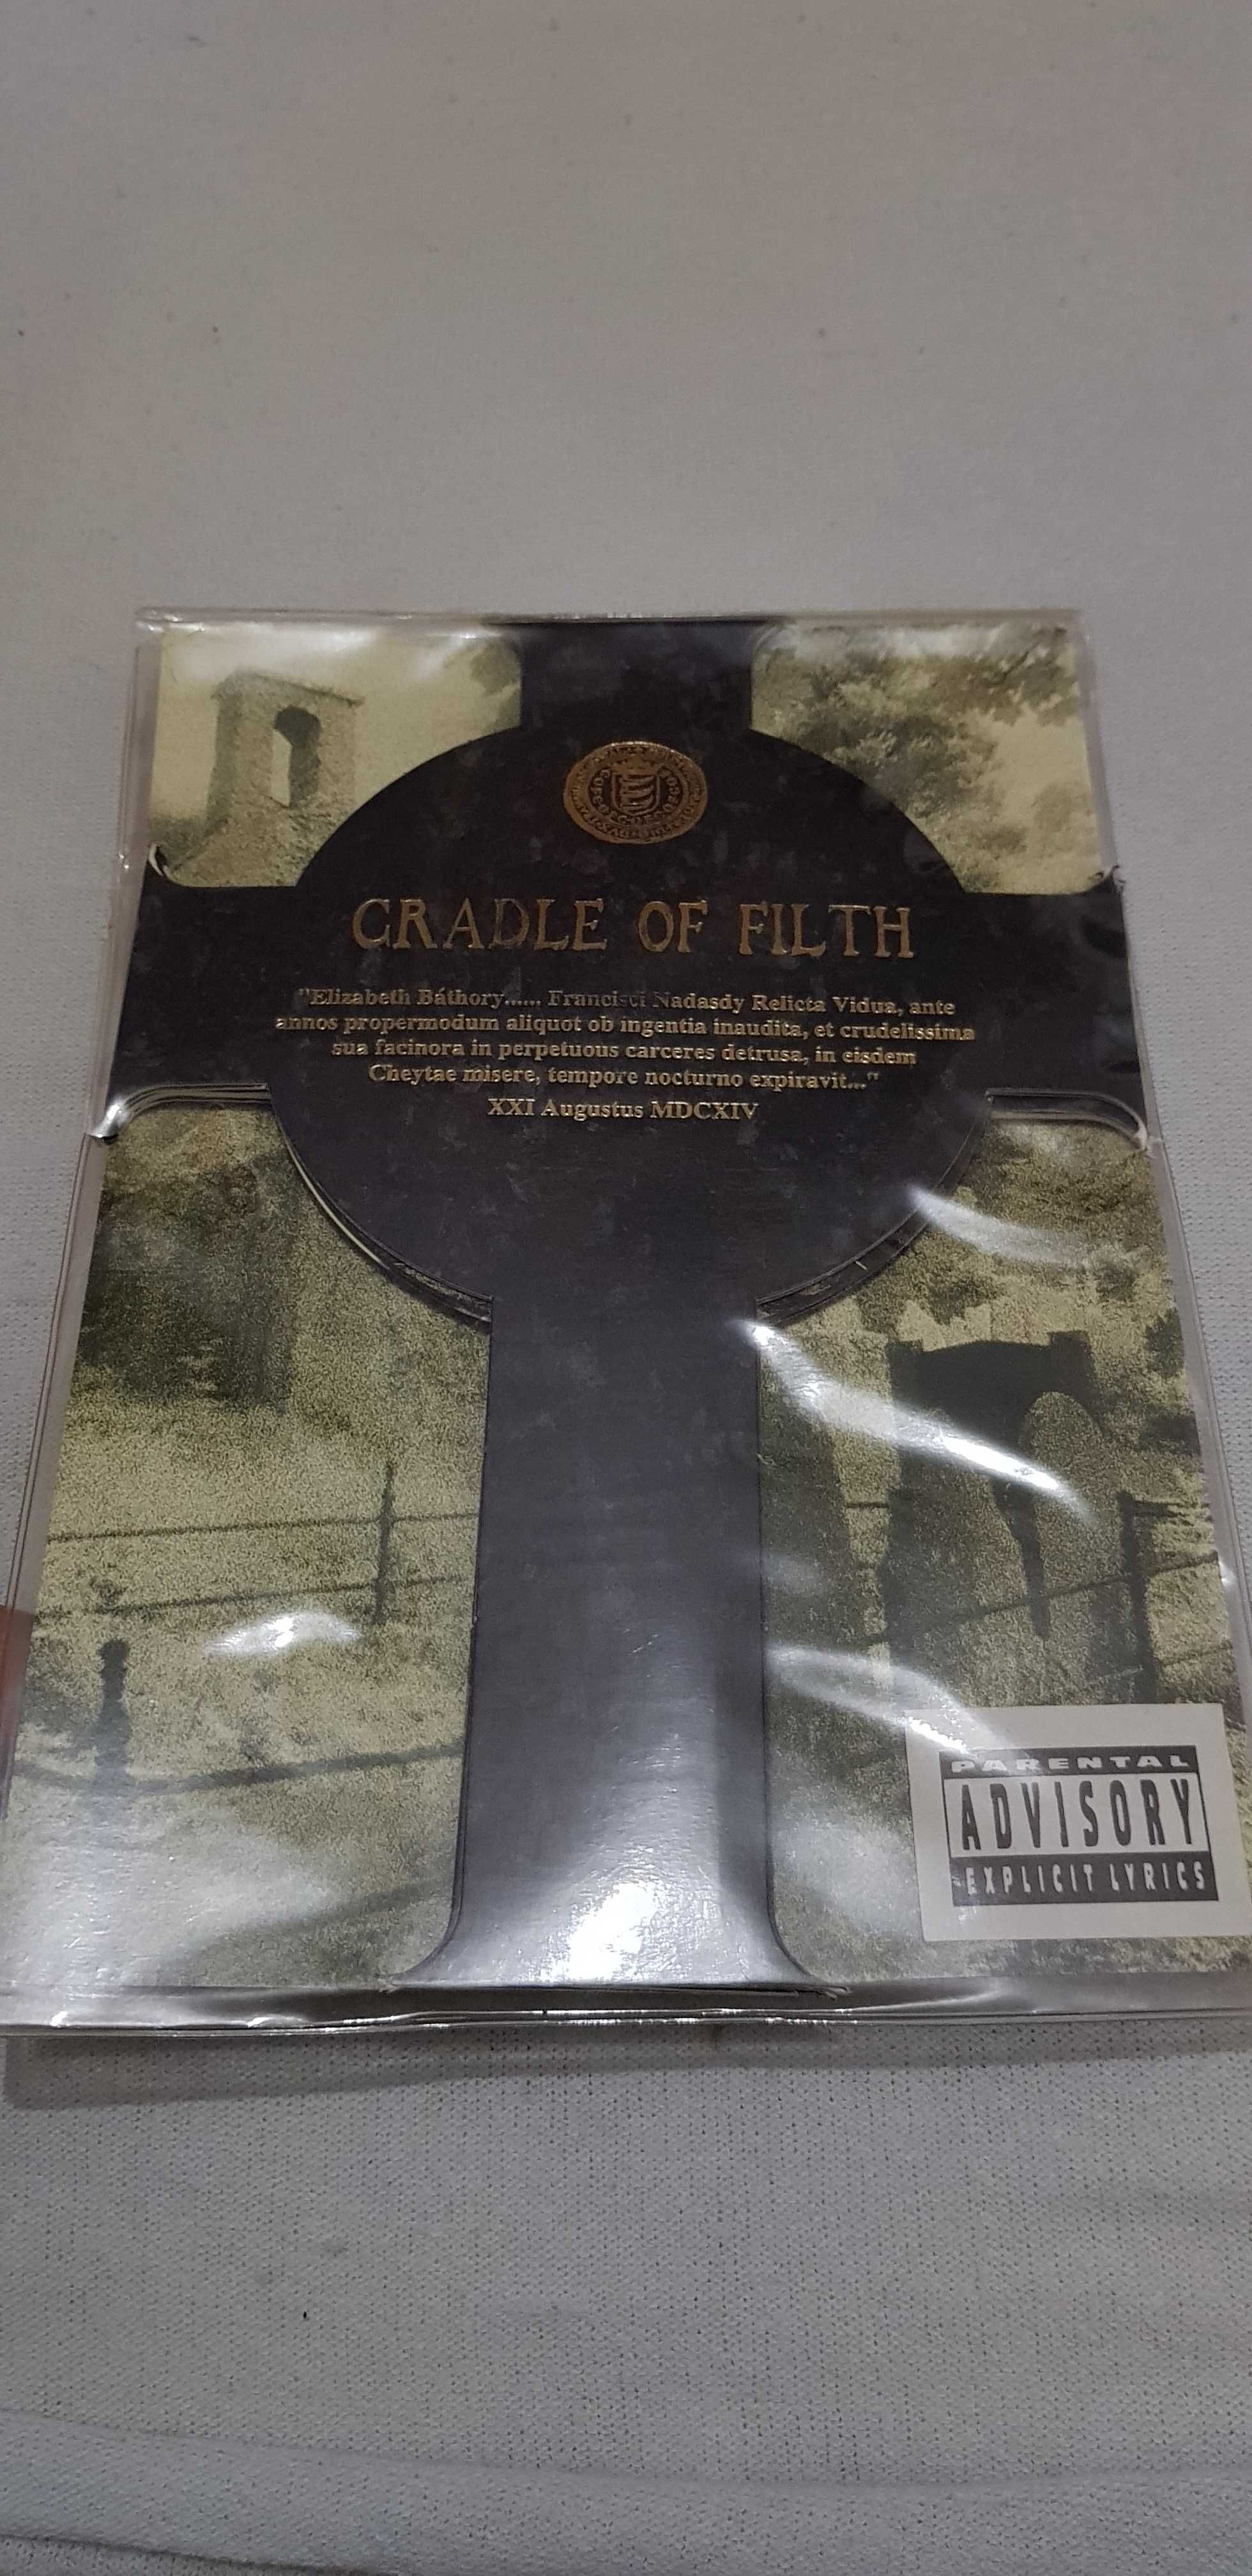 Cradle Of Filth - Cruelty And The Beast (Cross Edition)